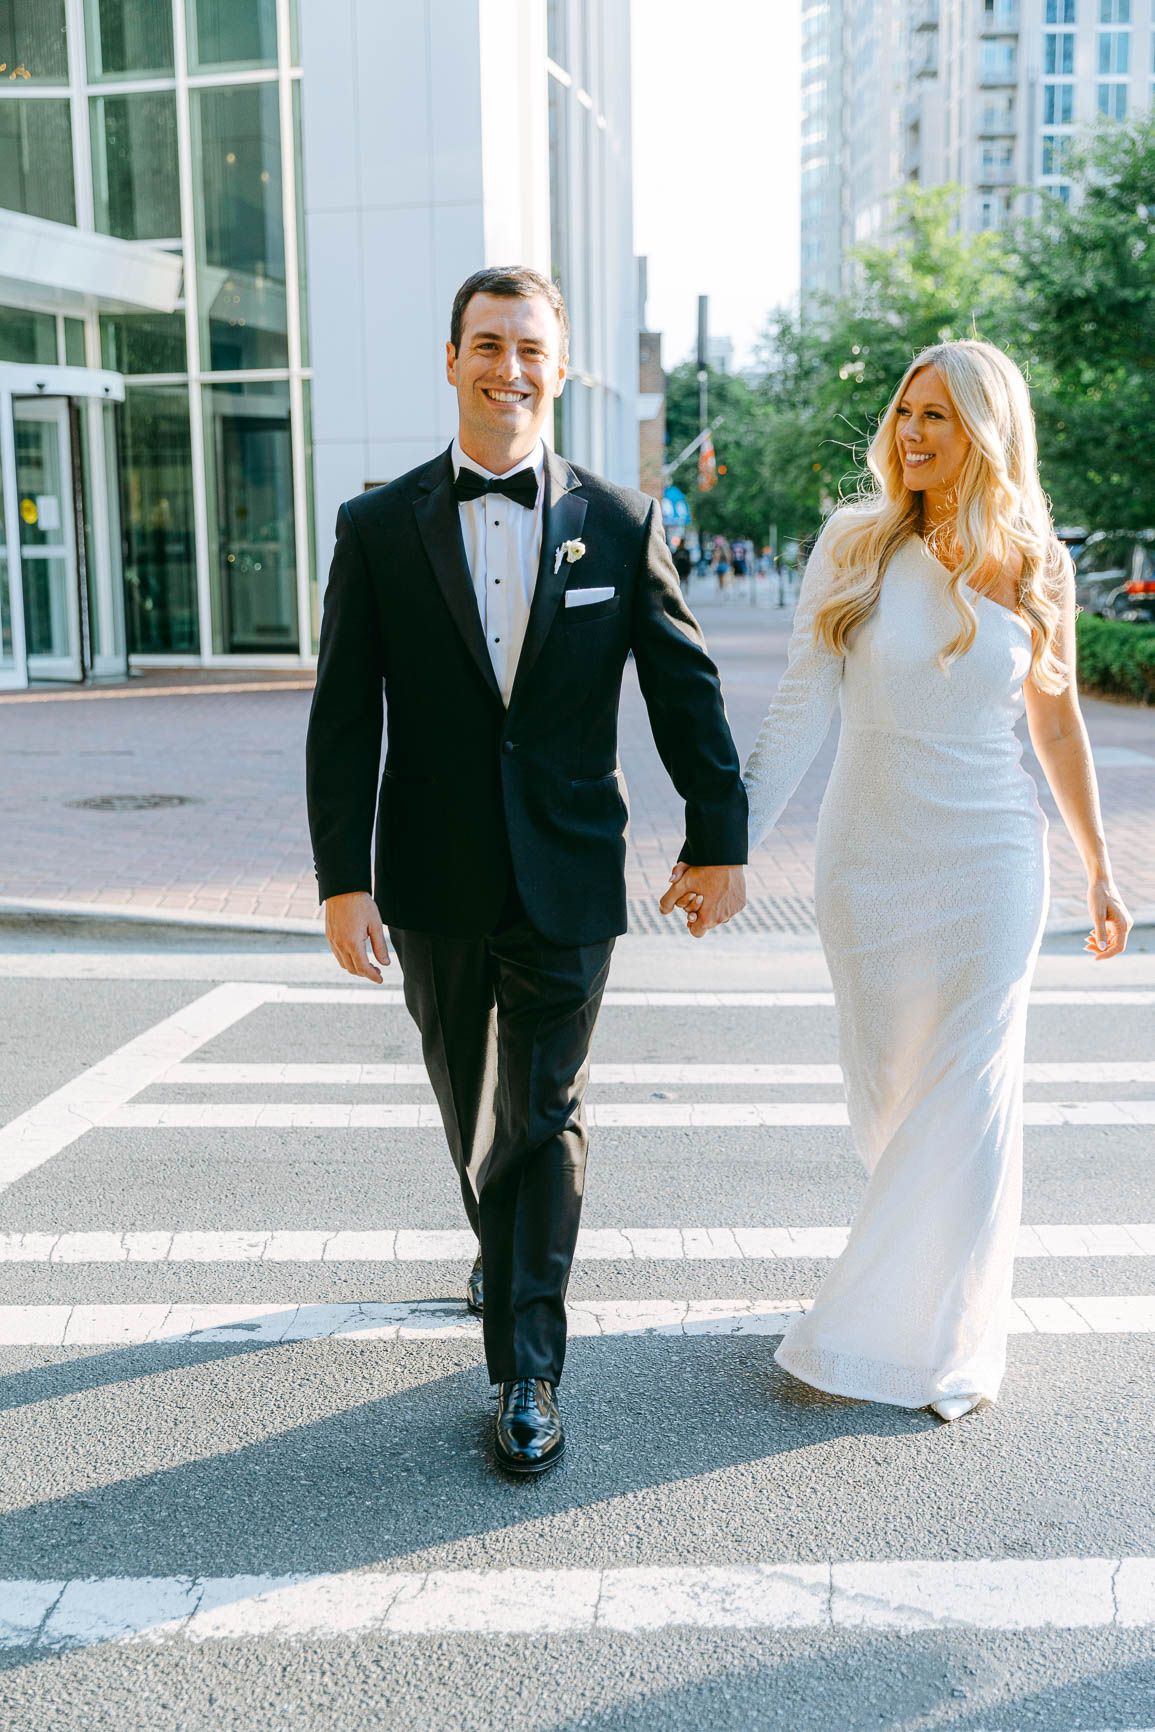 uptown Charlotte wedding shot by by Nhieu Tang Photography | nhieutang.com